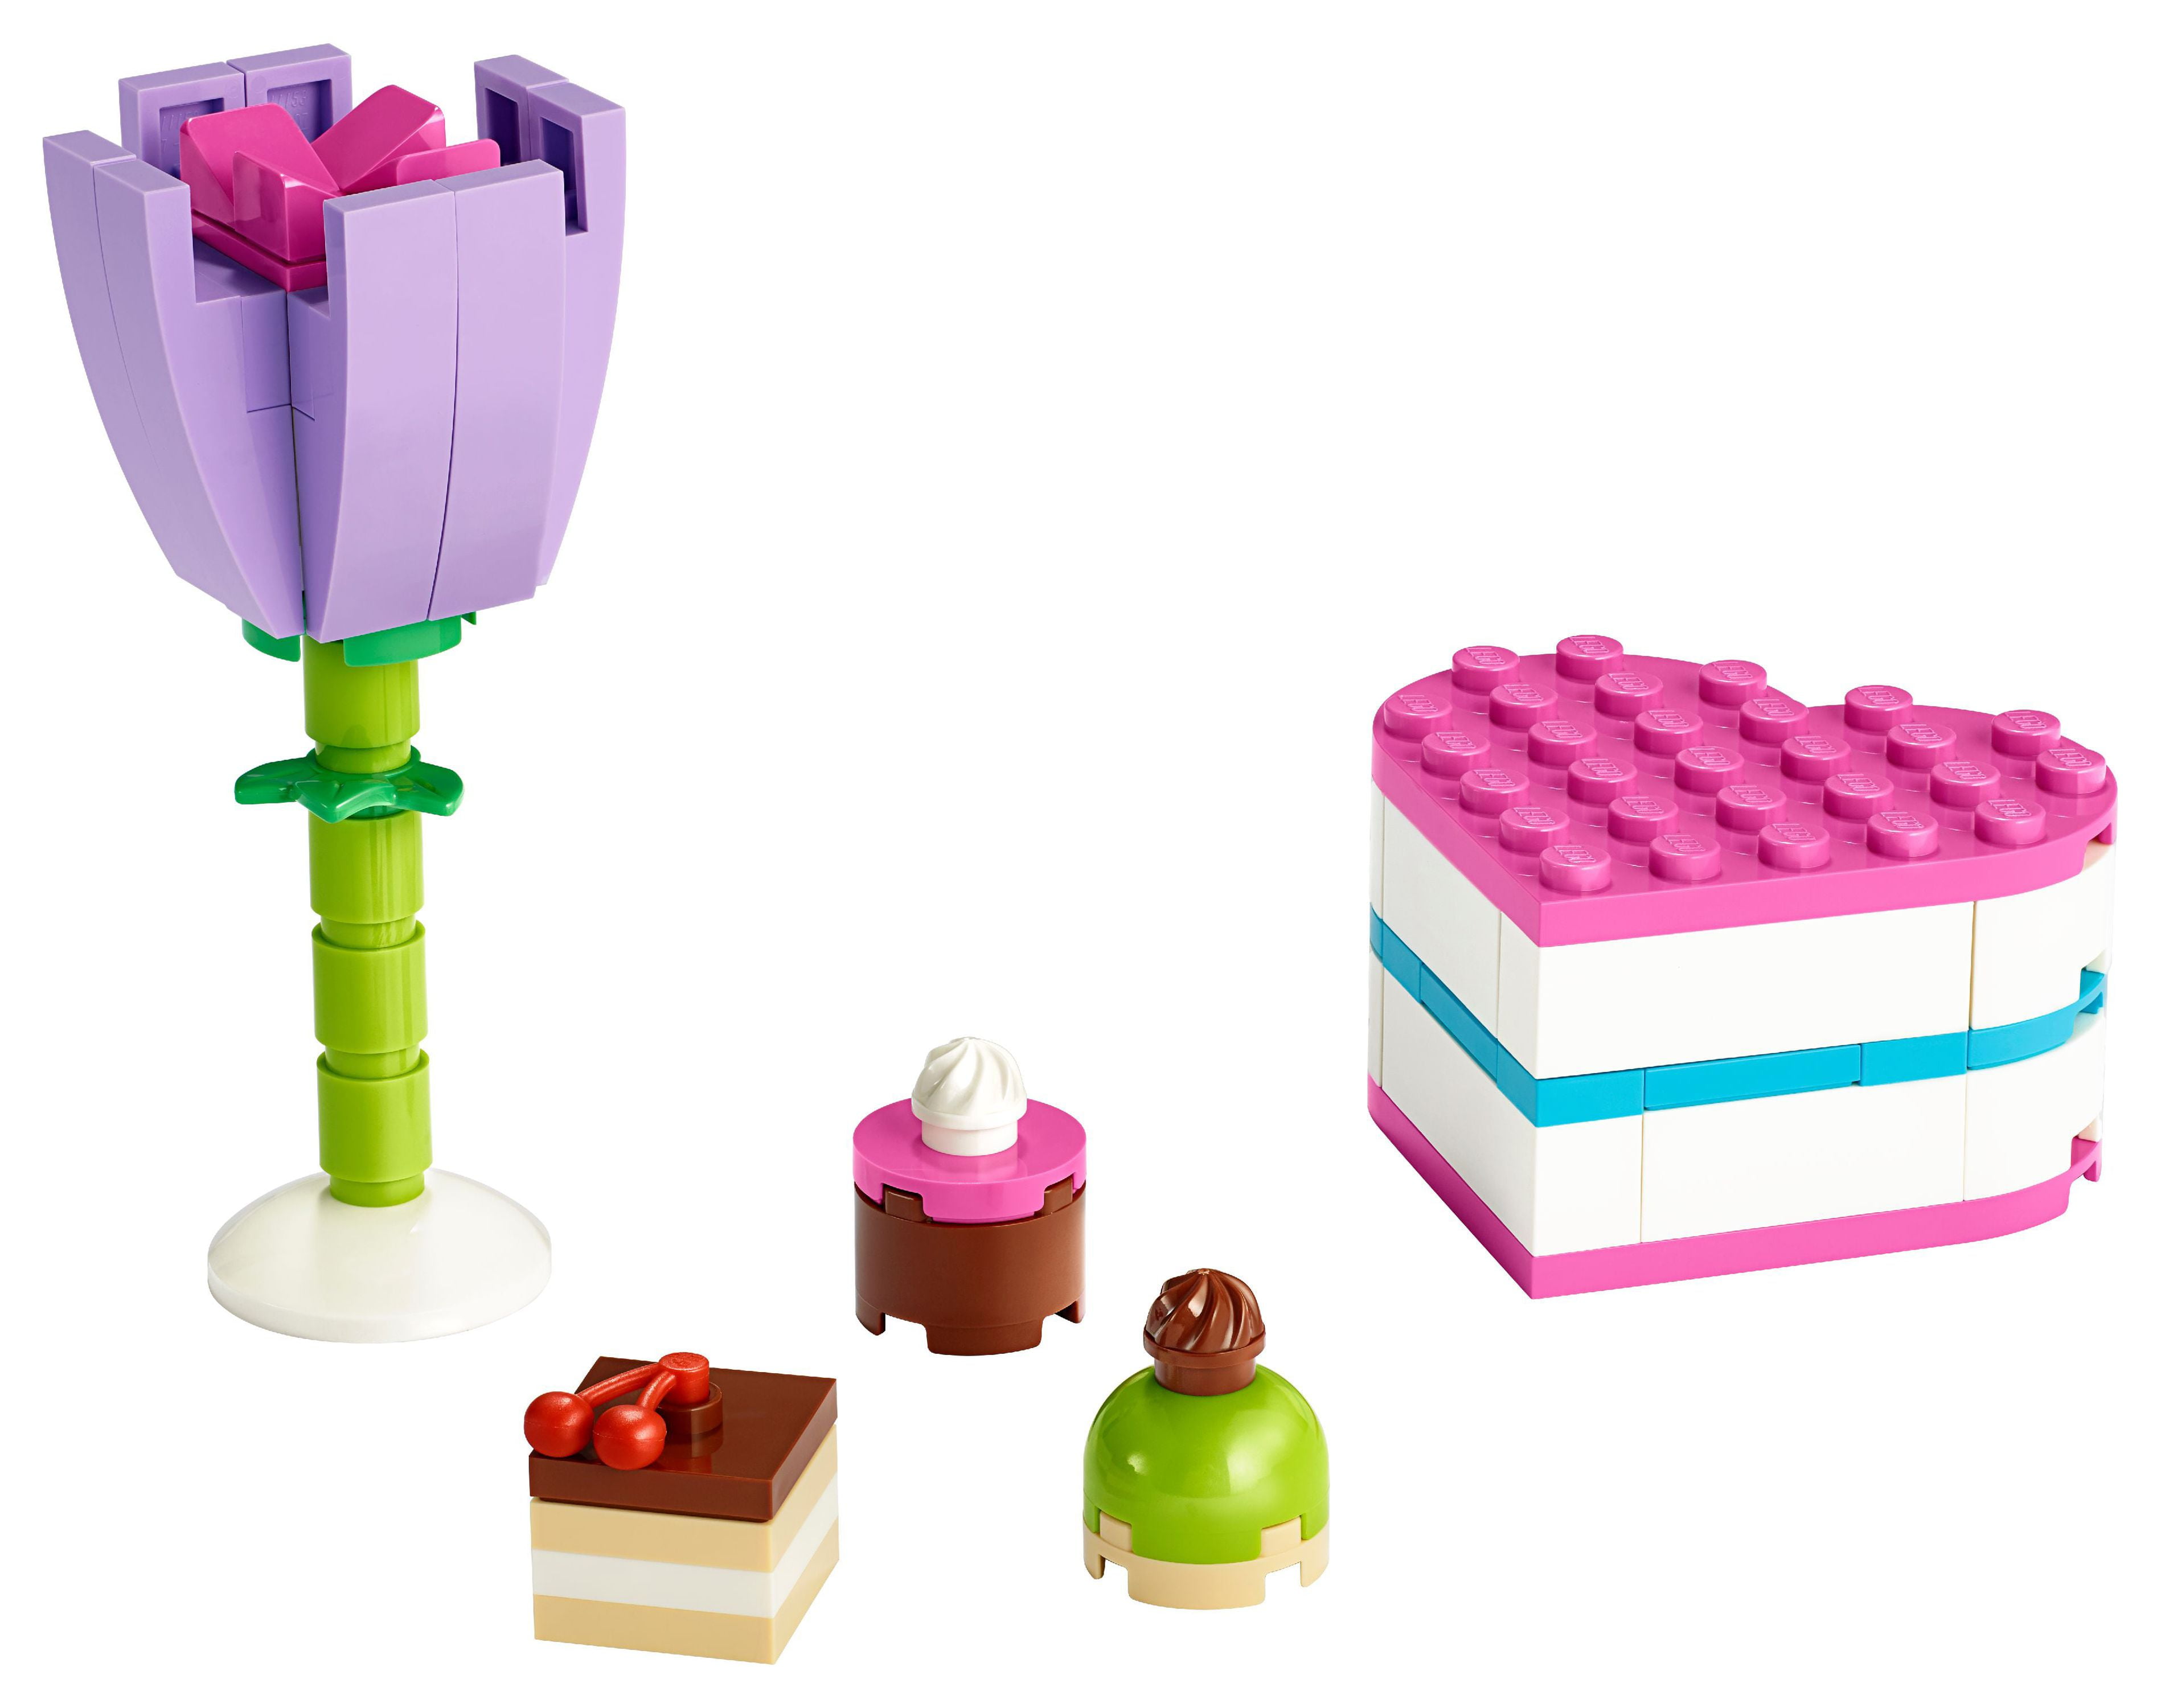 Lego Botanical Collection Flower Bouquet 10280 and Chocolate Box & Flower  30411